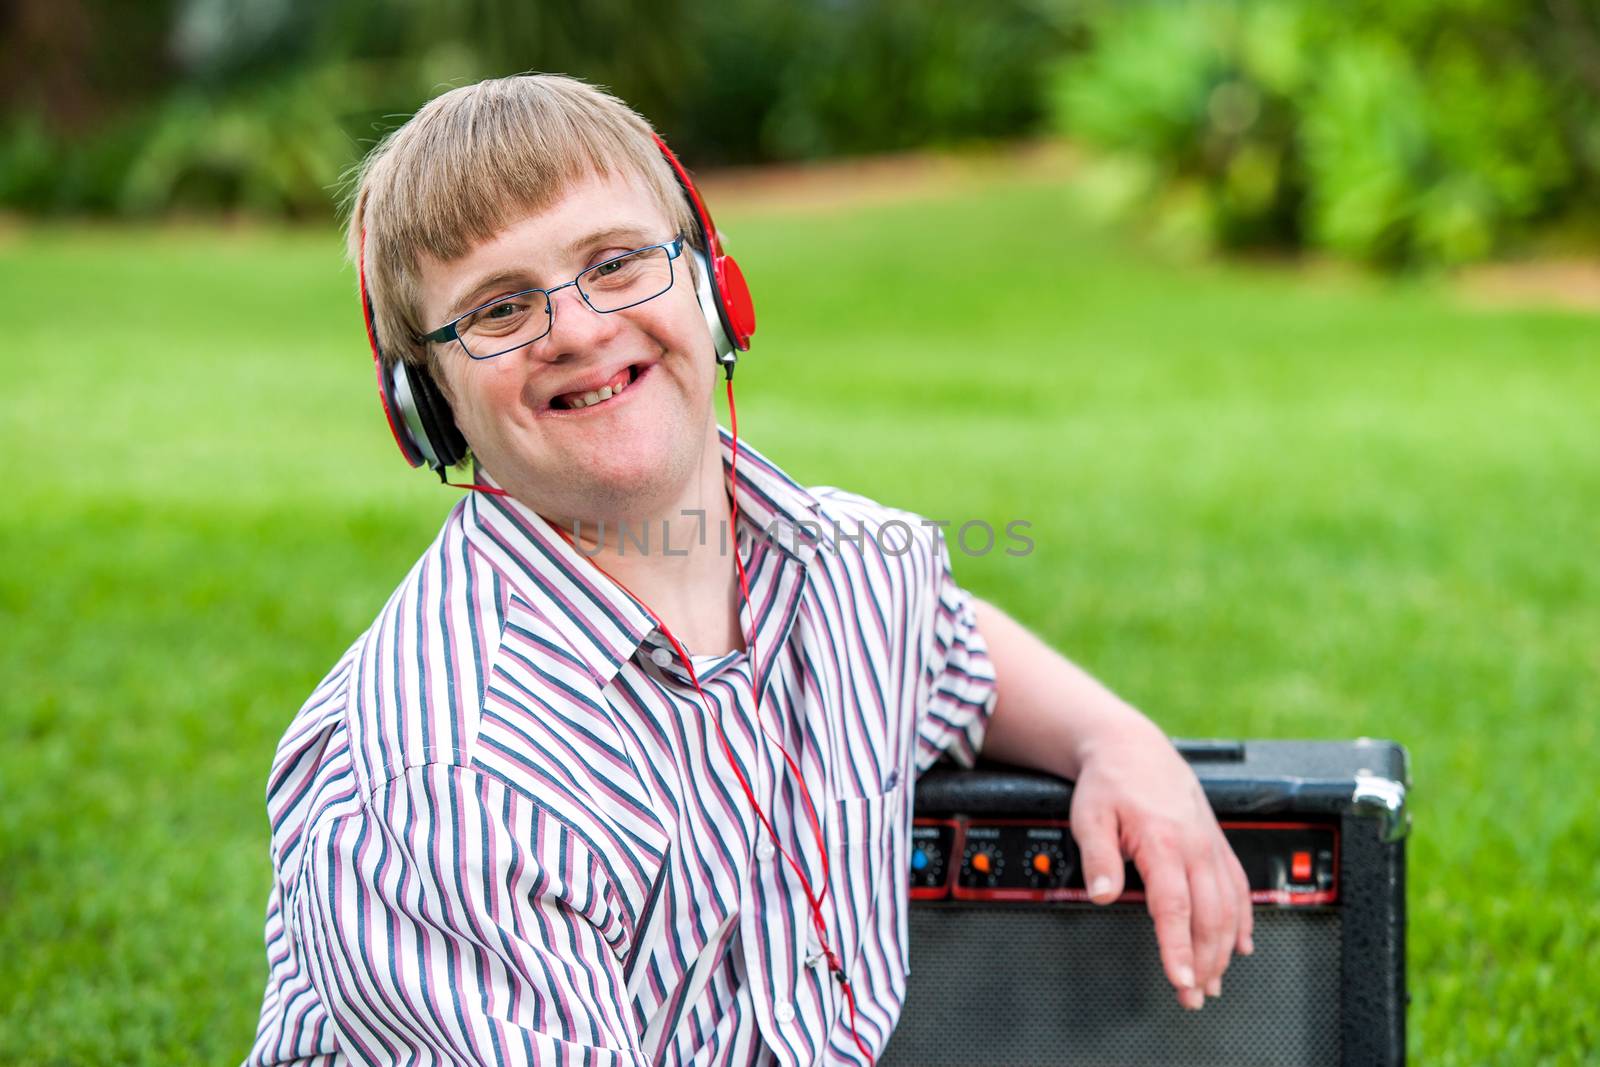 Boy with down syndrome wearing headphones. by karelnoppe